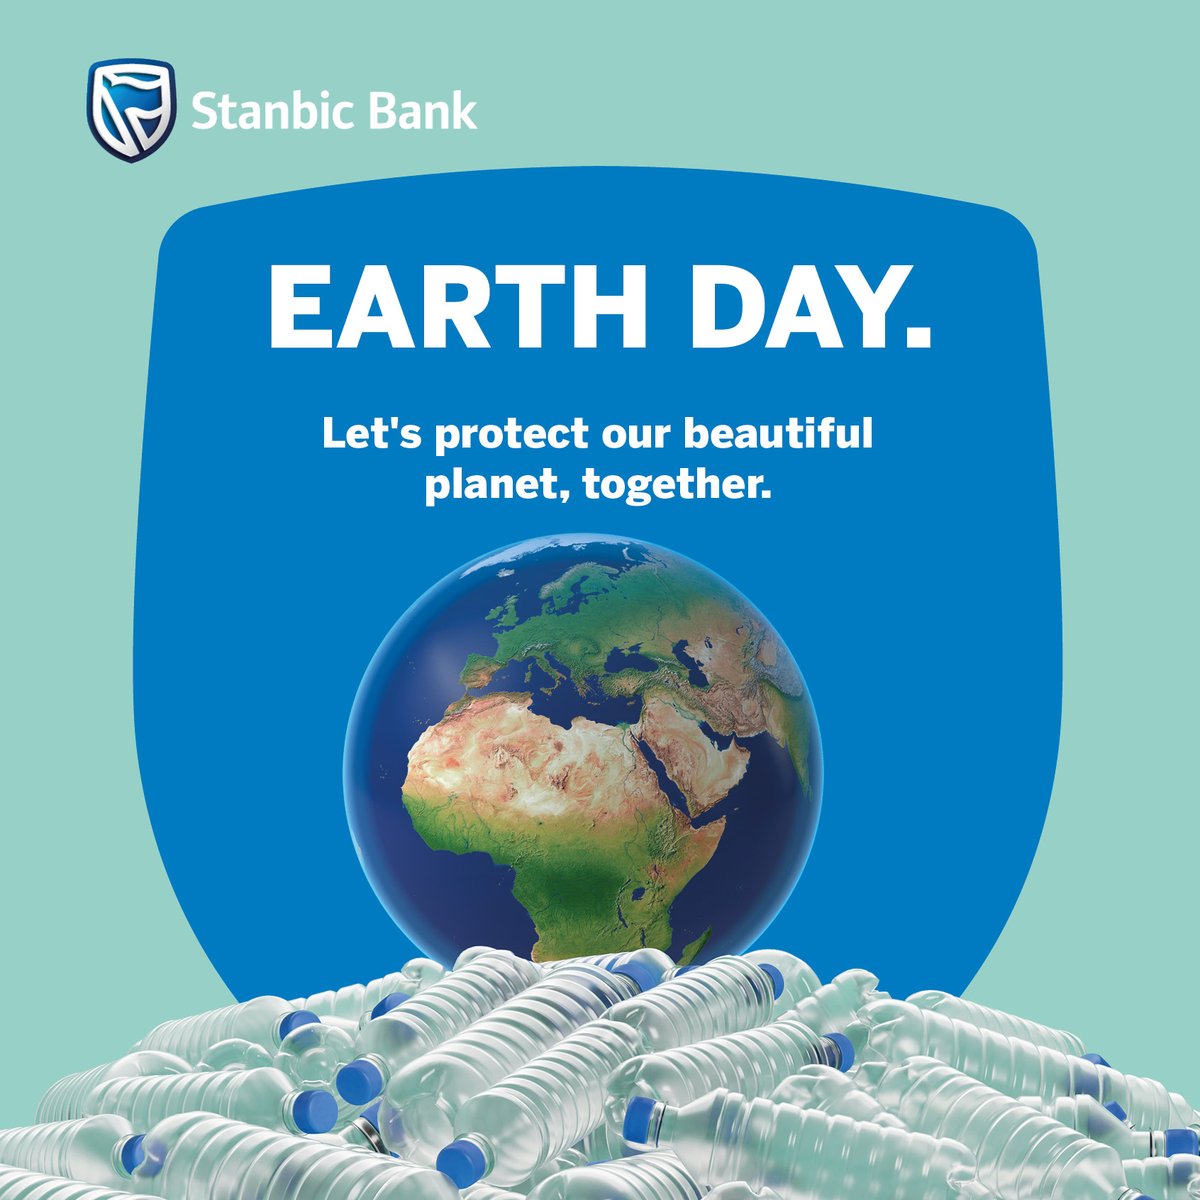 Celebrate Earth Day with Stanbic's pledge to #PlanetVsPlastics & our Keep Zambia Clean and Green Initiative. Let's reduce plastic waste and preserve our Earth. Tip: Carry a reusable water bottle and cut down on single-use plastics! #EarthDay #StanbicCares